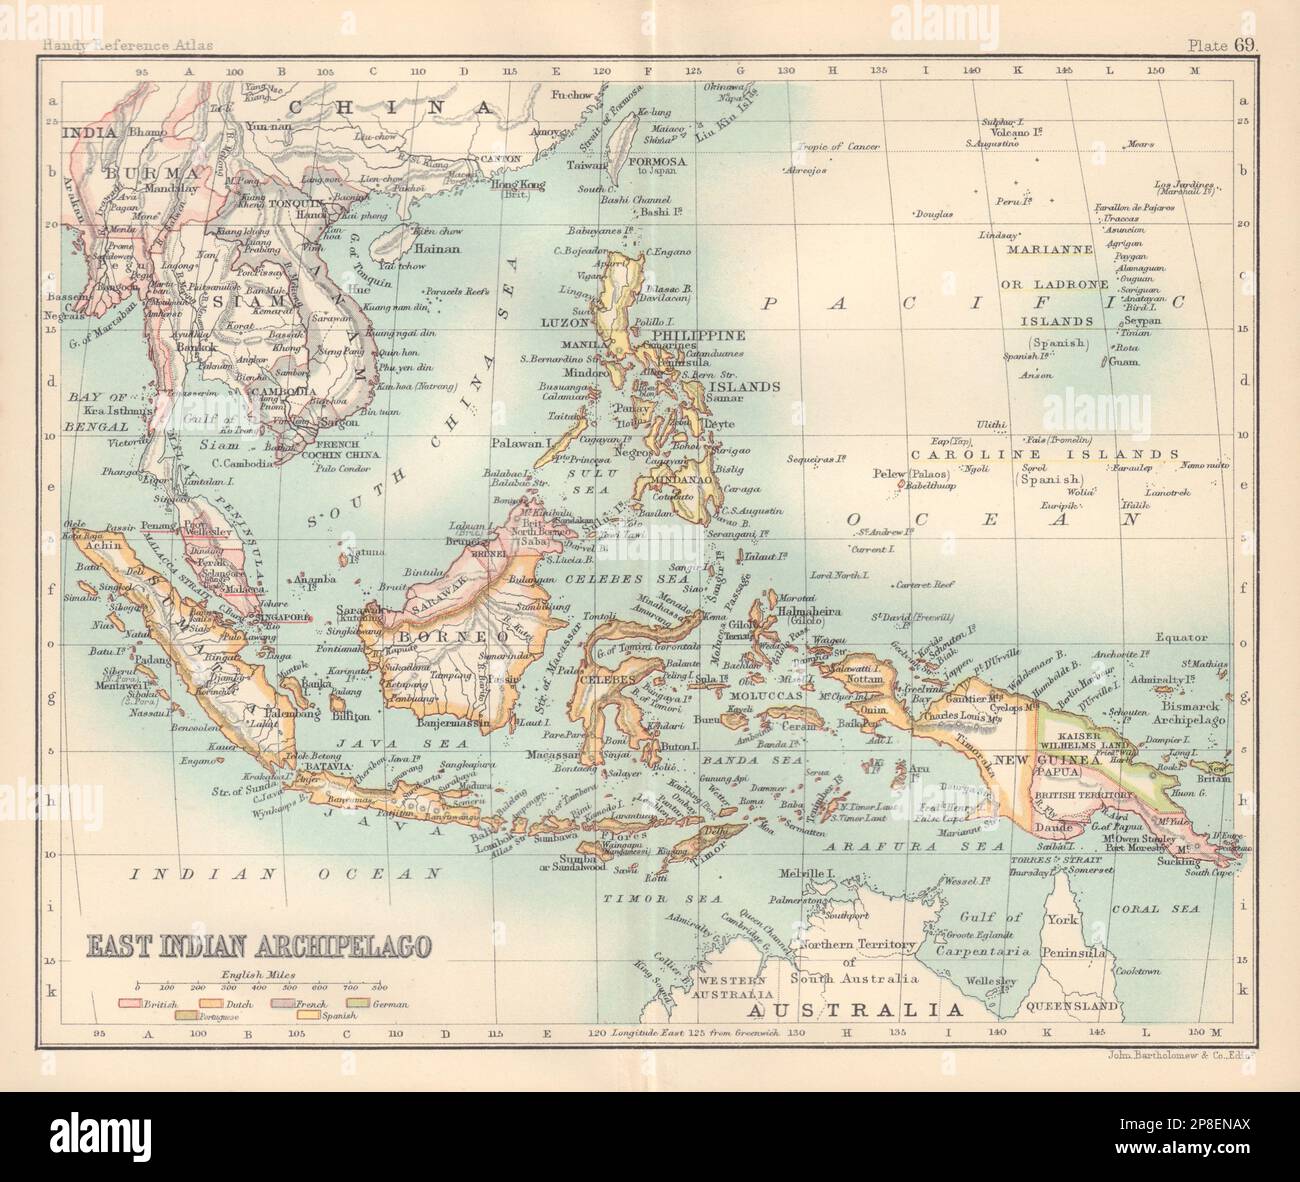 East Indian archipelago. Philippines Indonesia. Dutch East Indies 1898 old map Stock Photo